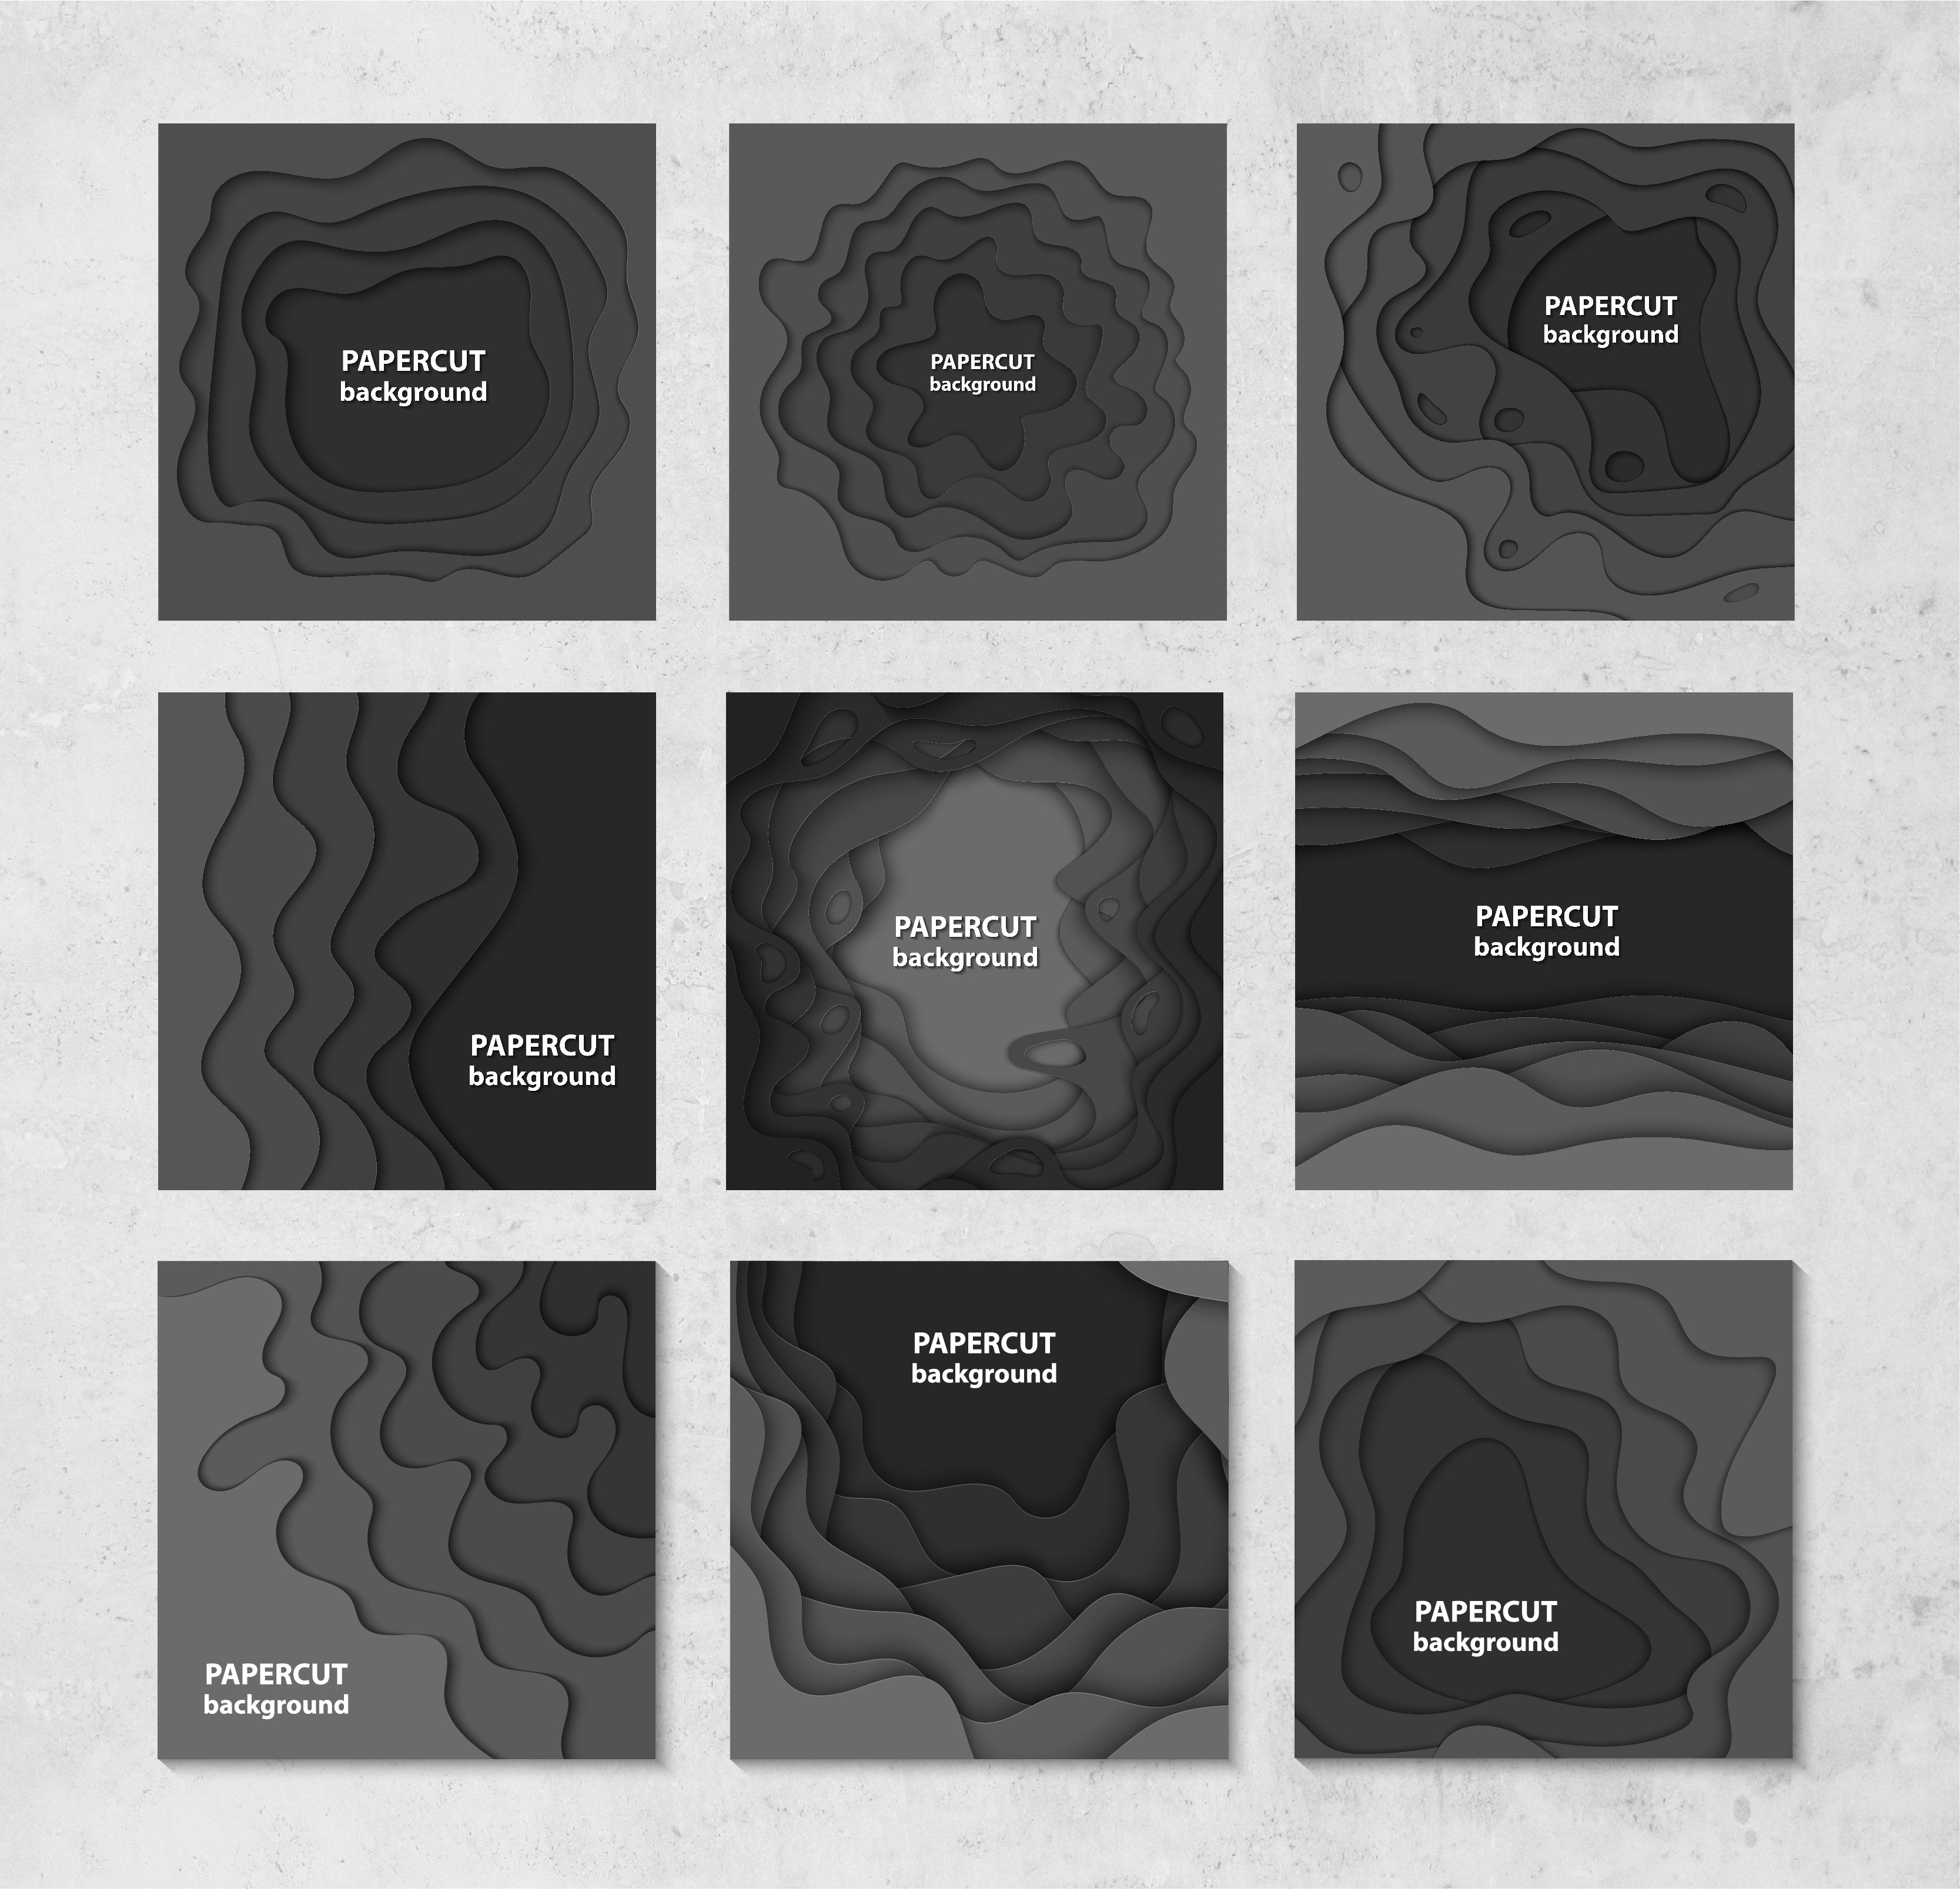 Series of black and white business cards.